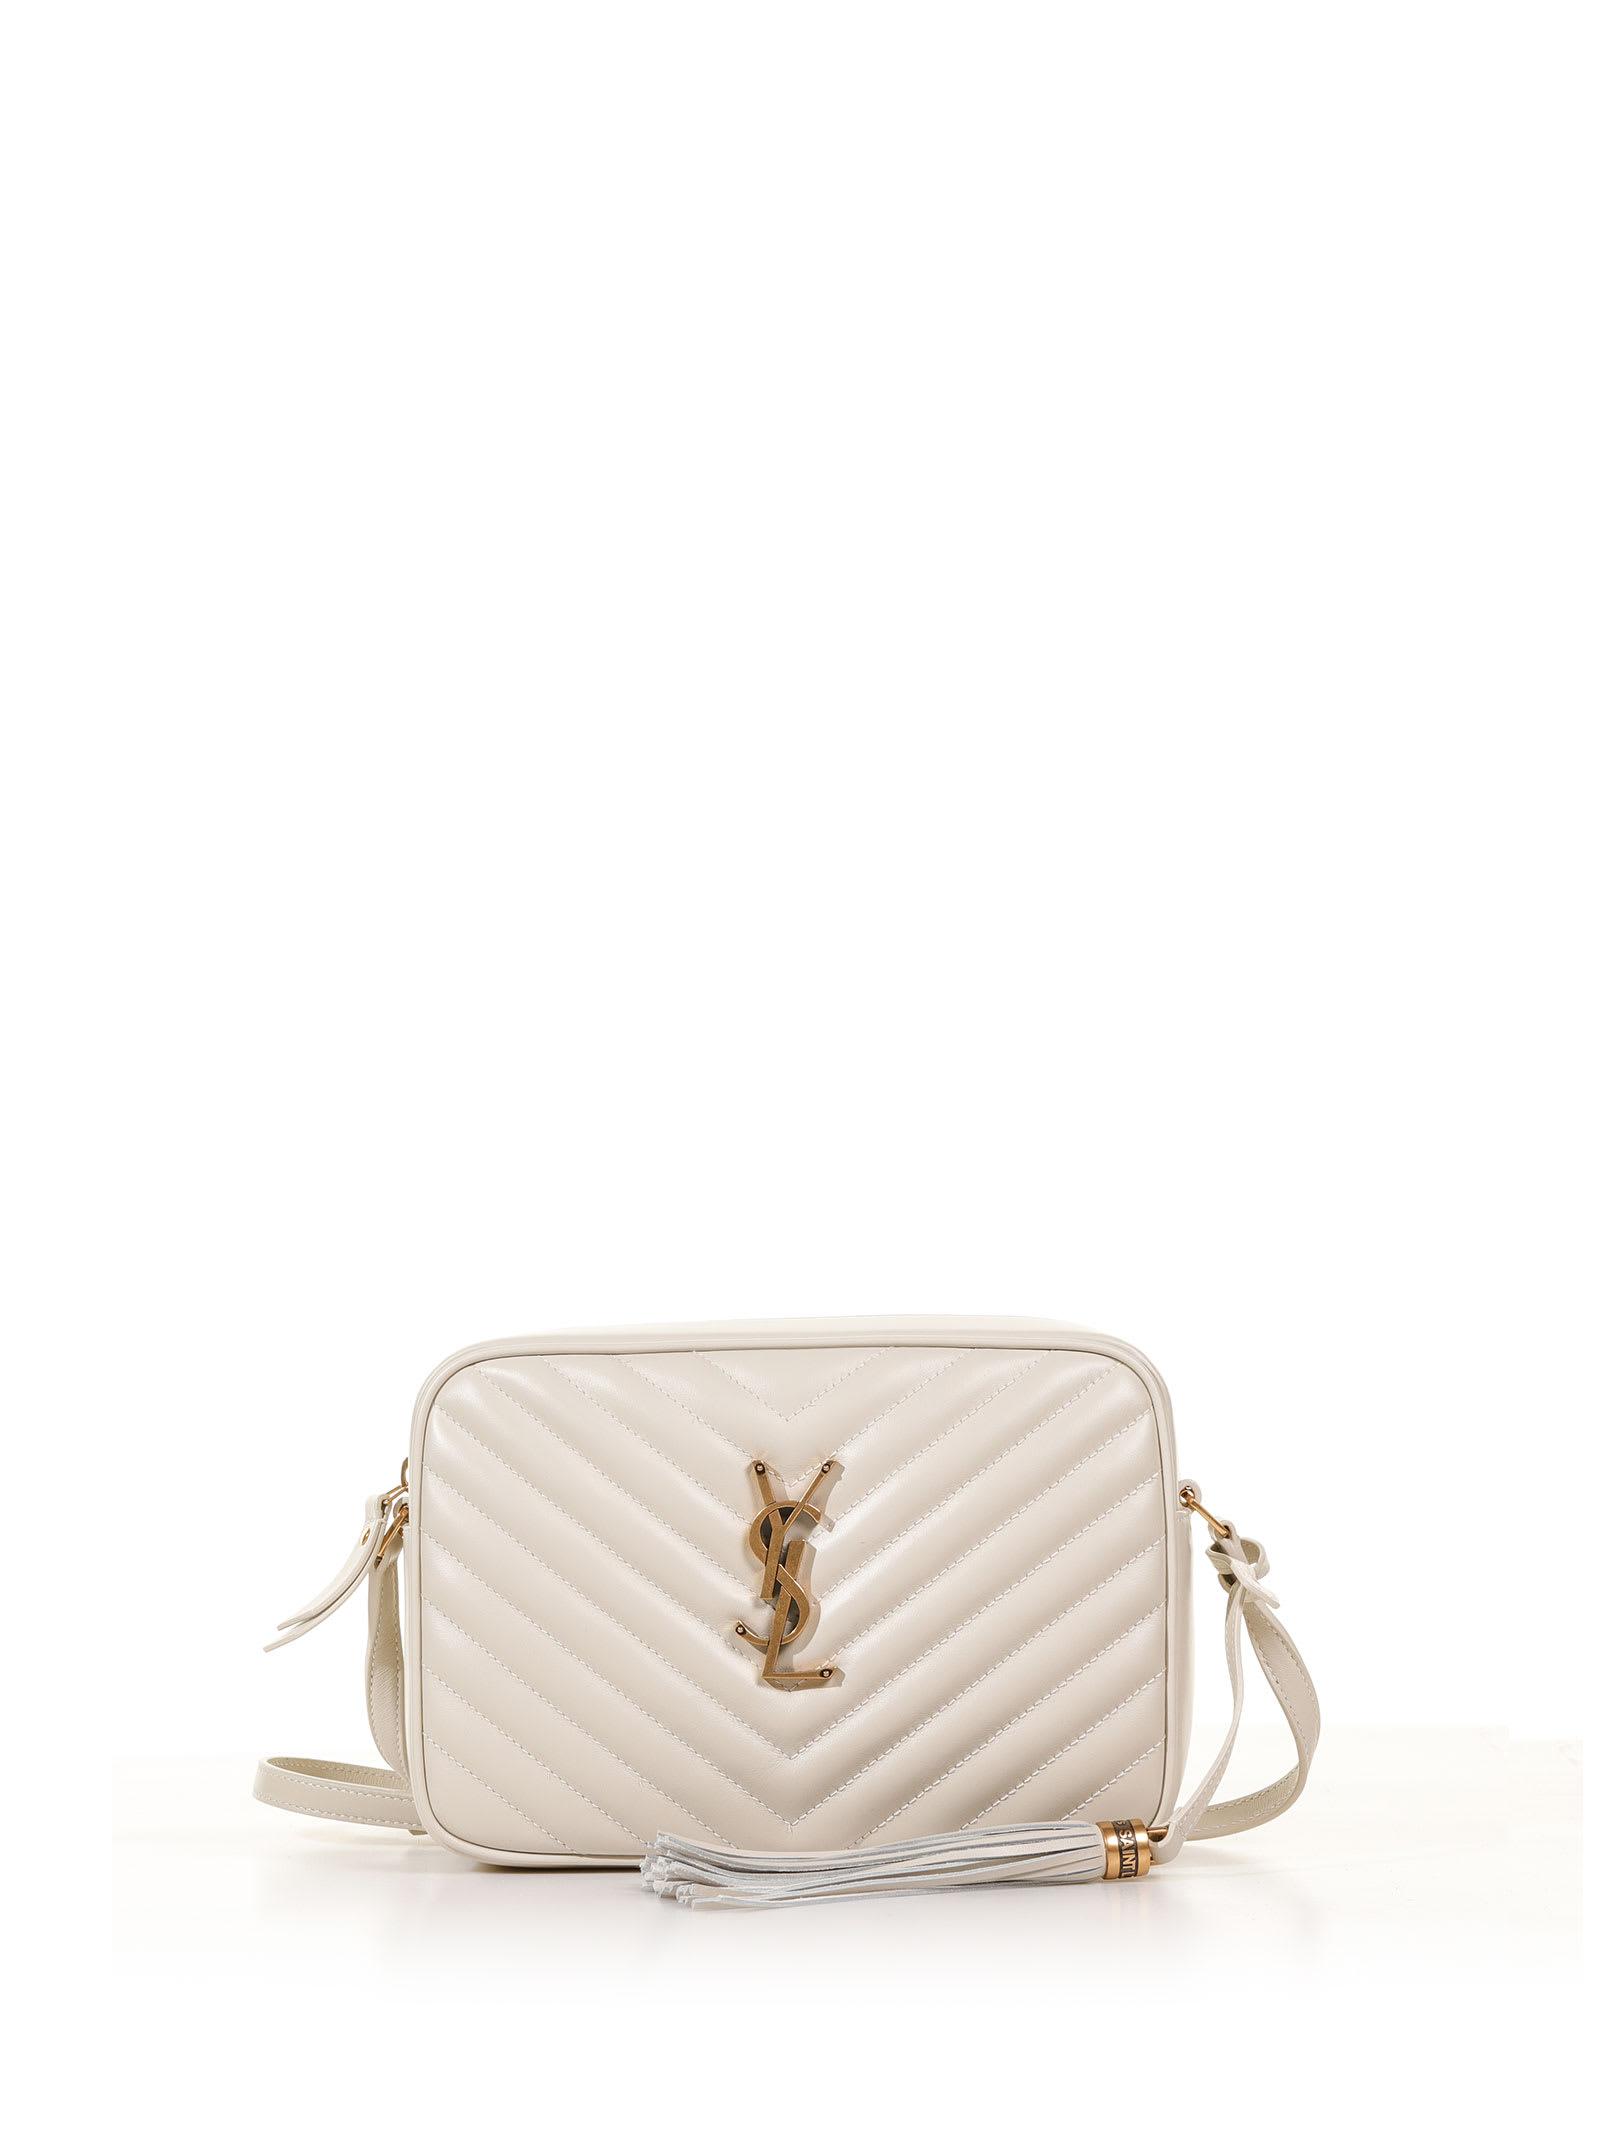 Saint Laurent Loulou Camera Bag In Quilted Leather in Natural